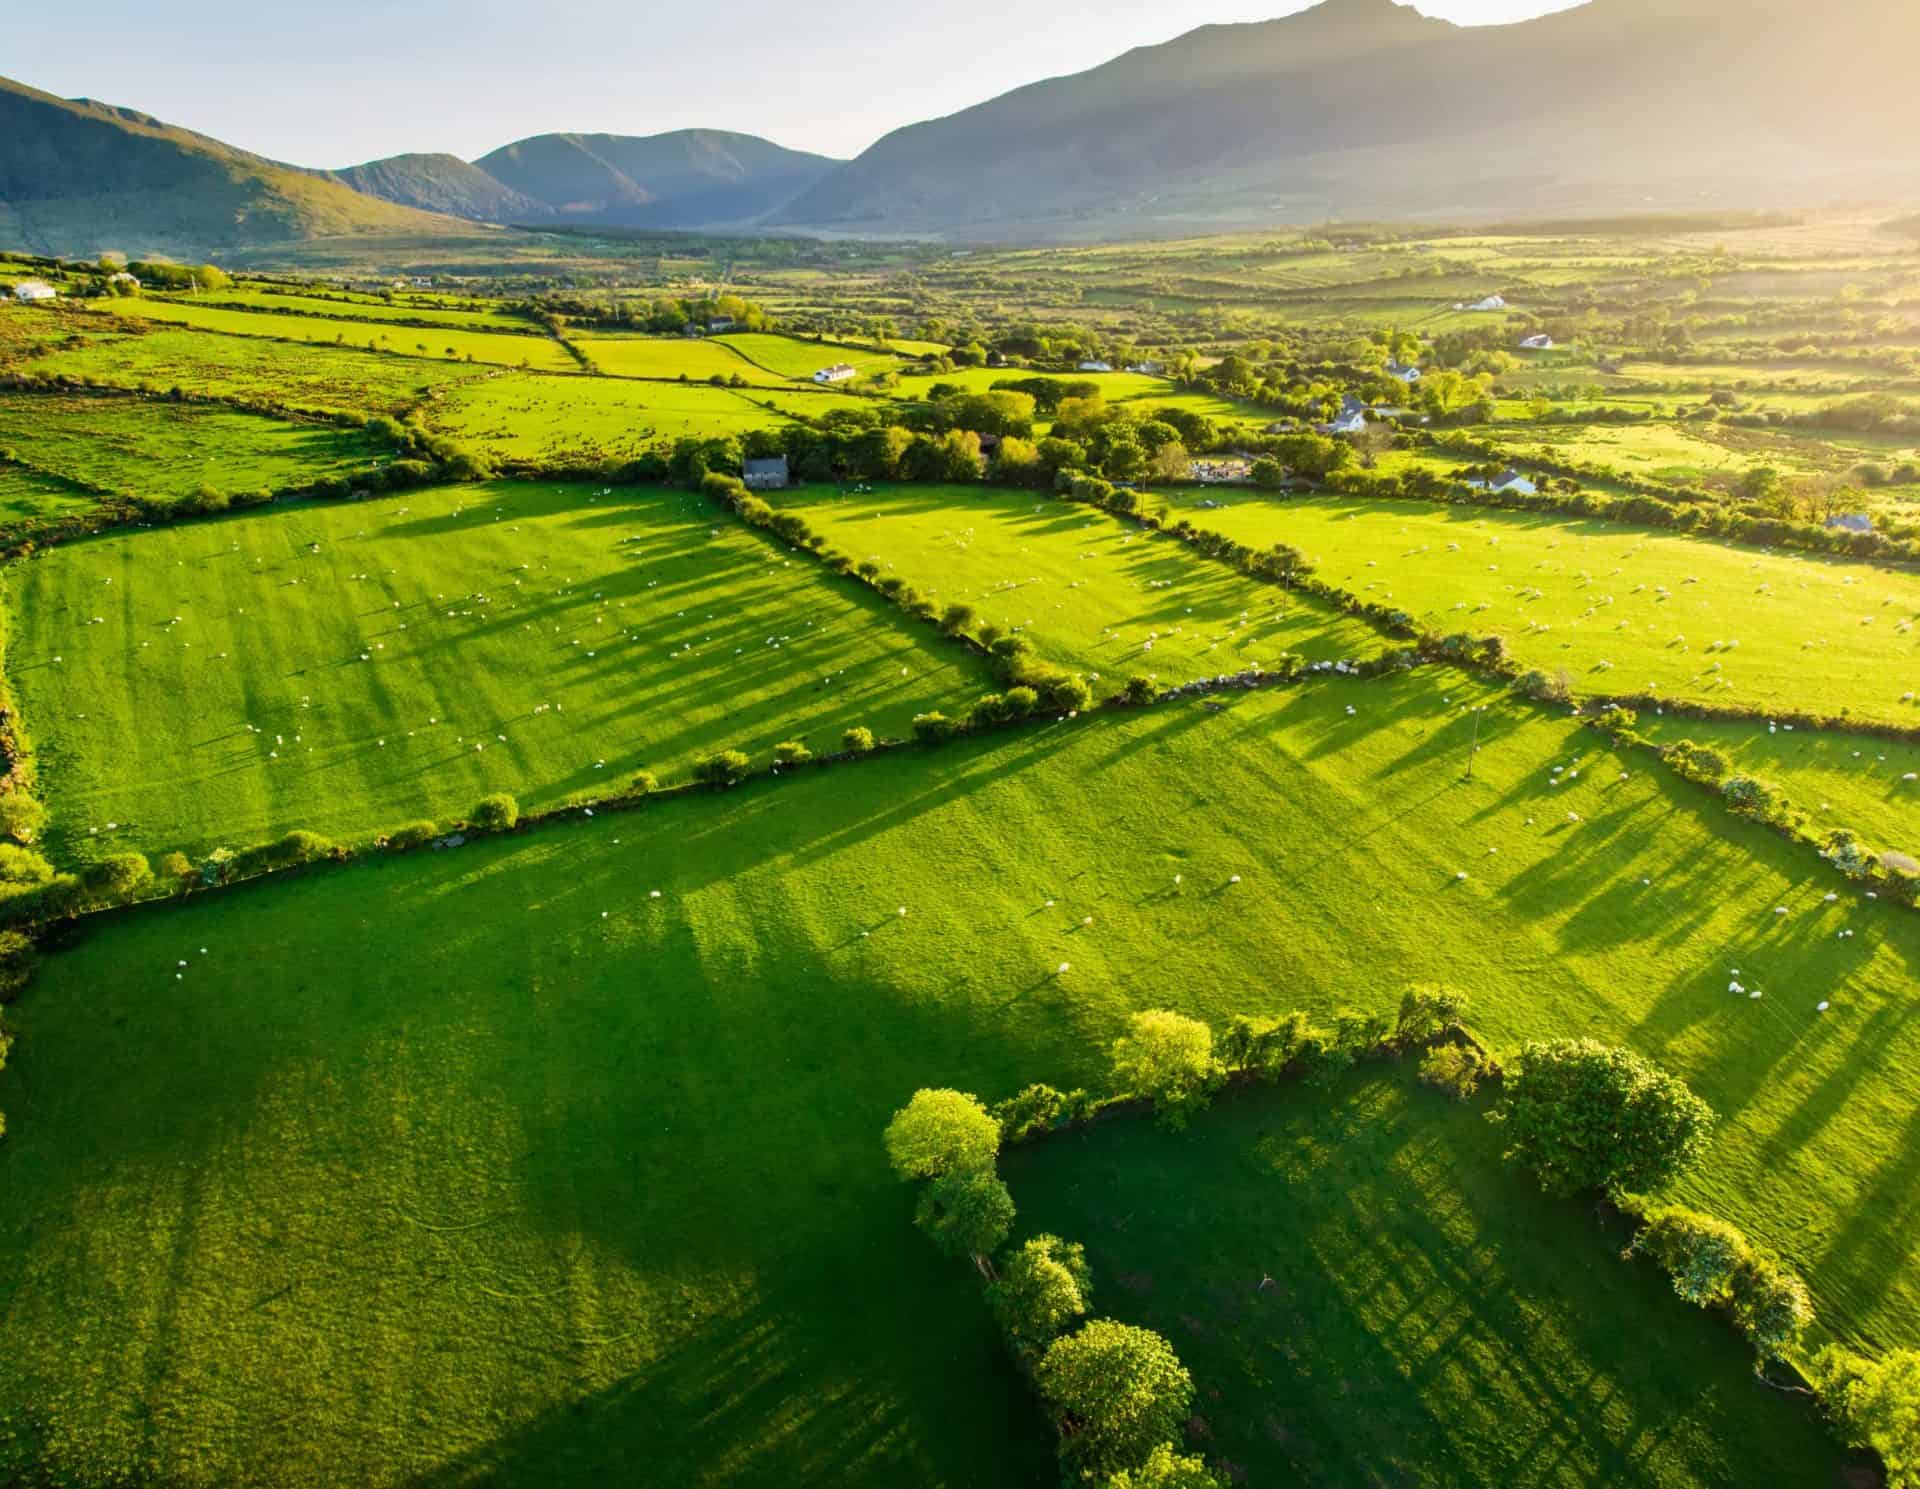 View from above of farmland in Ireland. Mountains in background.